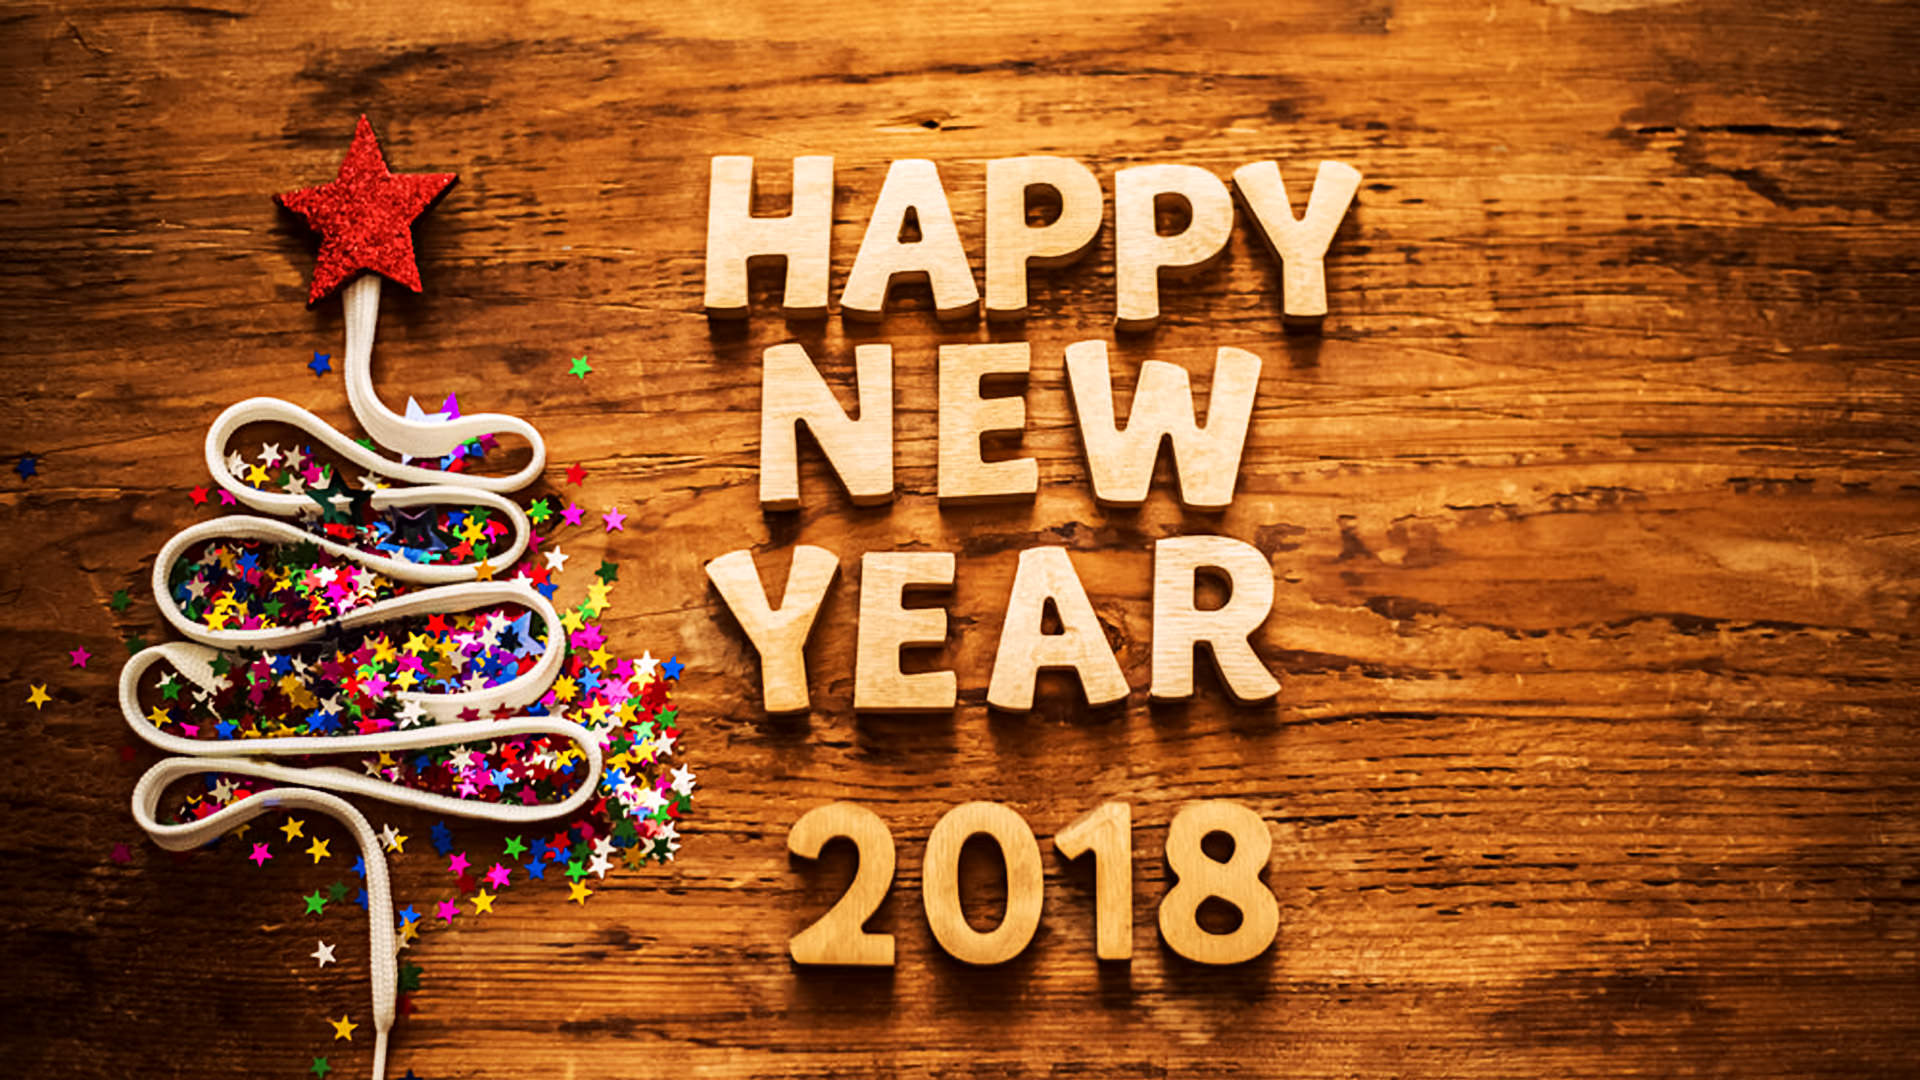 Special Happy New Year Wallpaper HD Greetings